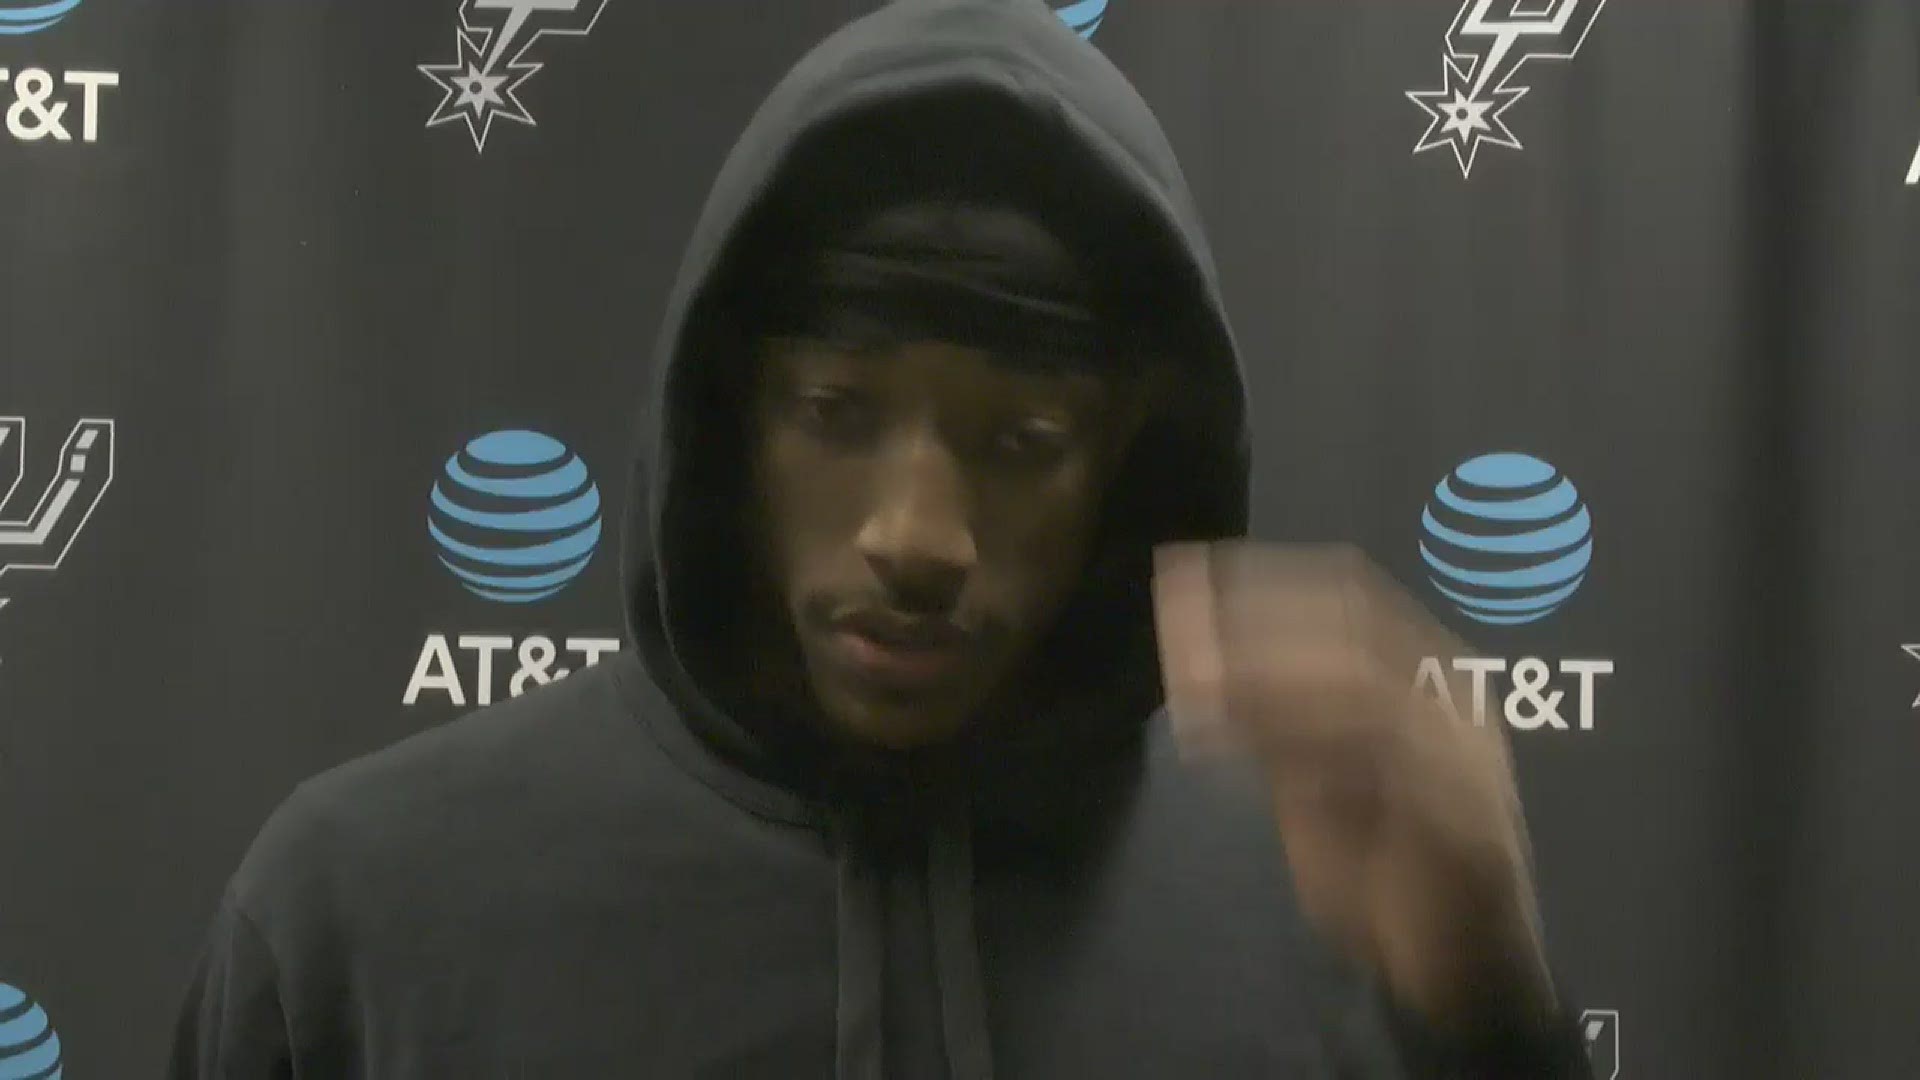 DeRozan answered questions about the challenges of playing a back-to-back game, and what needs to improve.